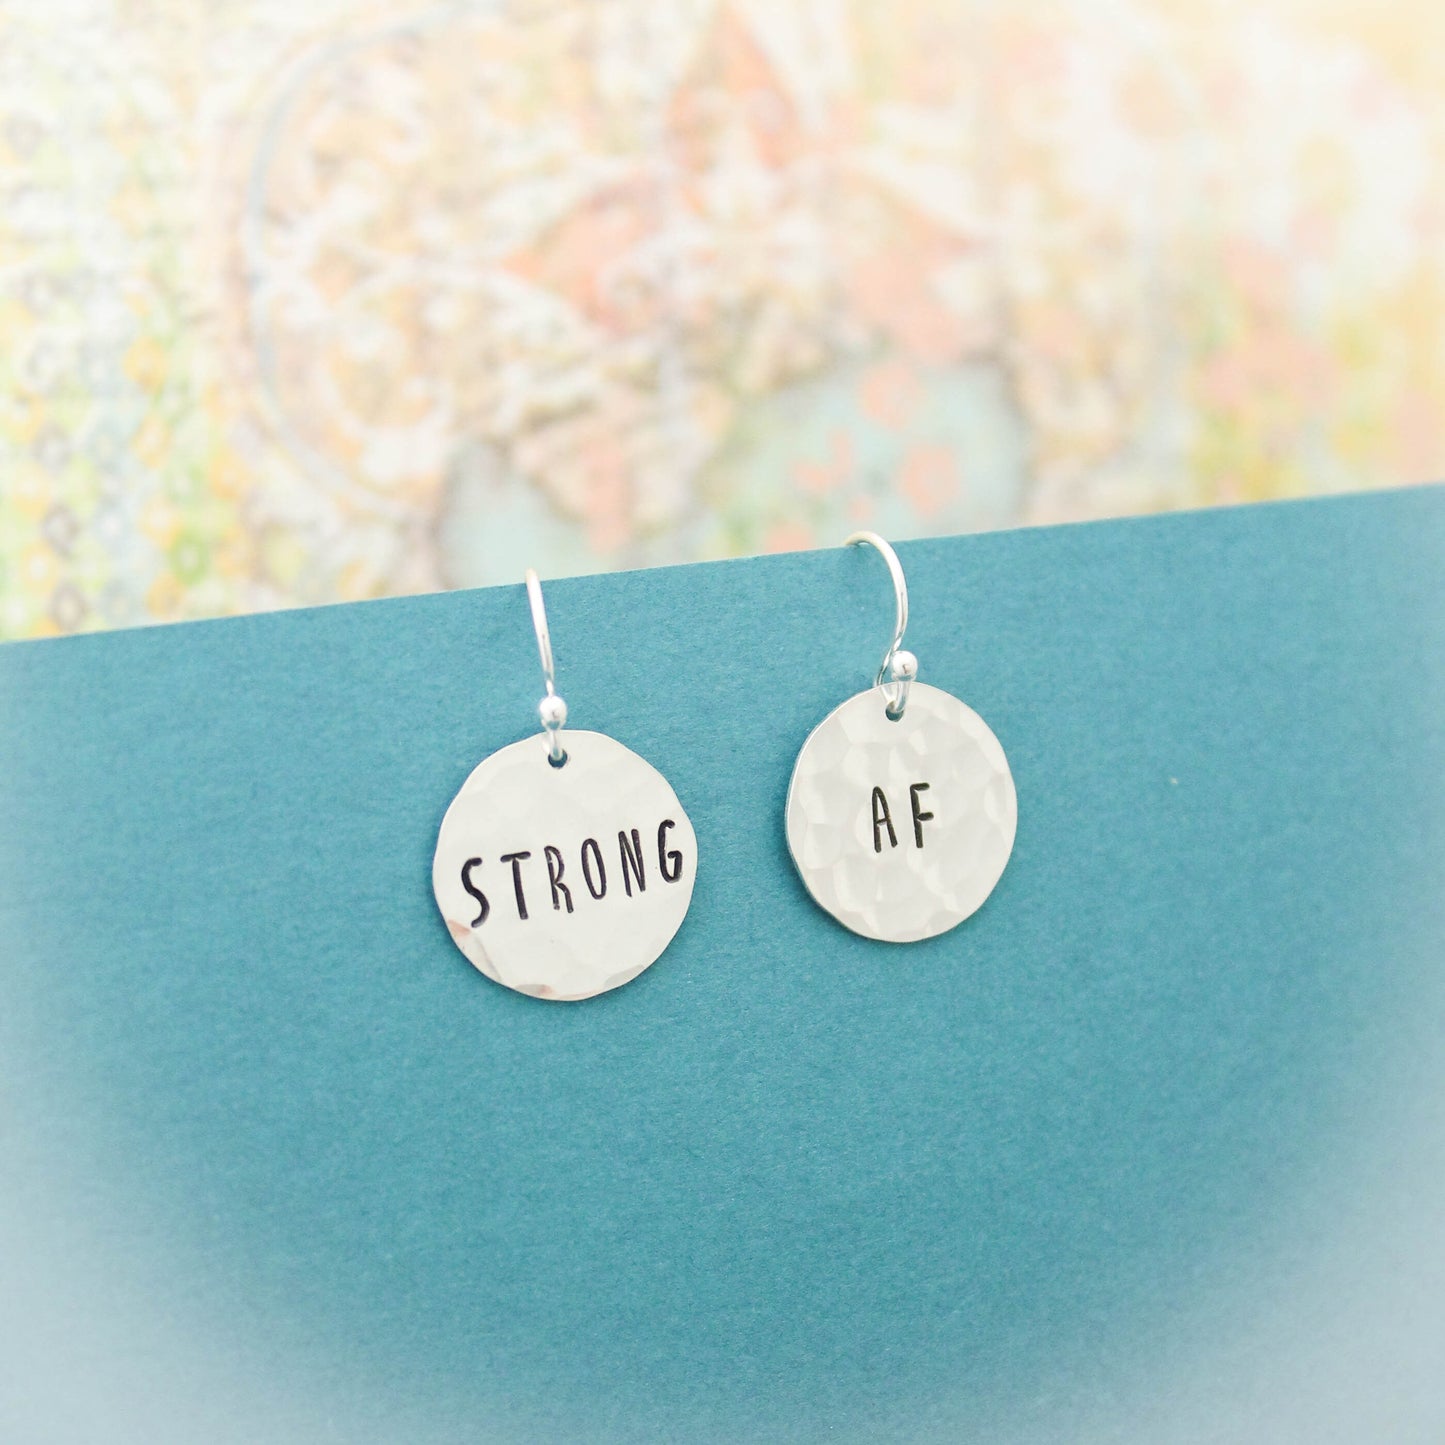 Strong AF Earrings in Sterling Silver, Motivational Inspirational Jewelry, Gifts for Her, Strong As Fuck Jewelry, Curse Word Jewelry Gift